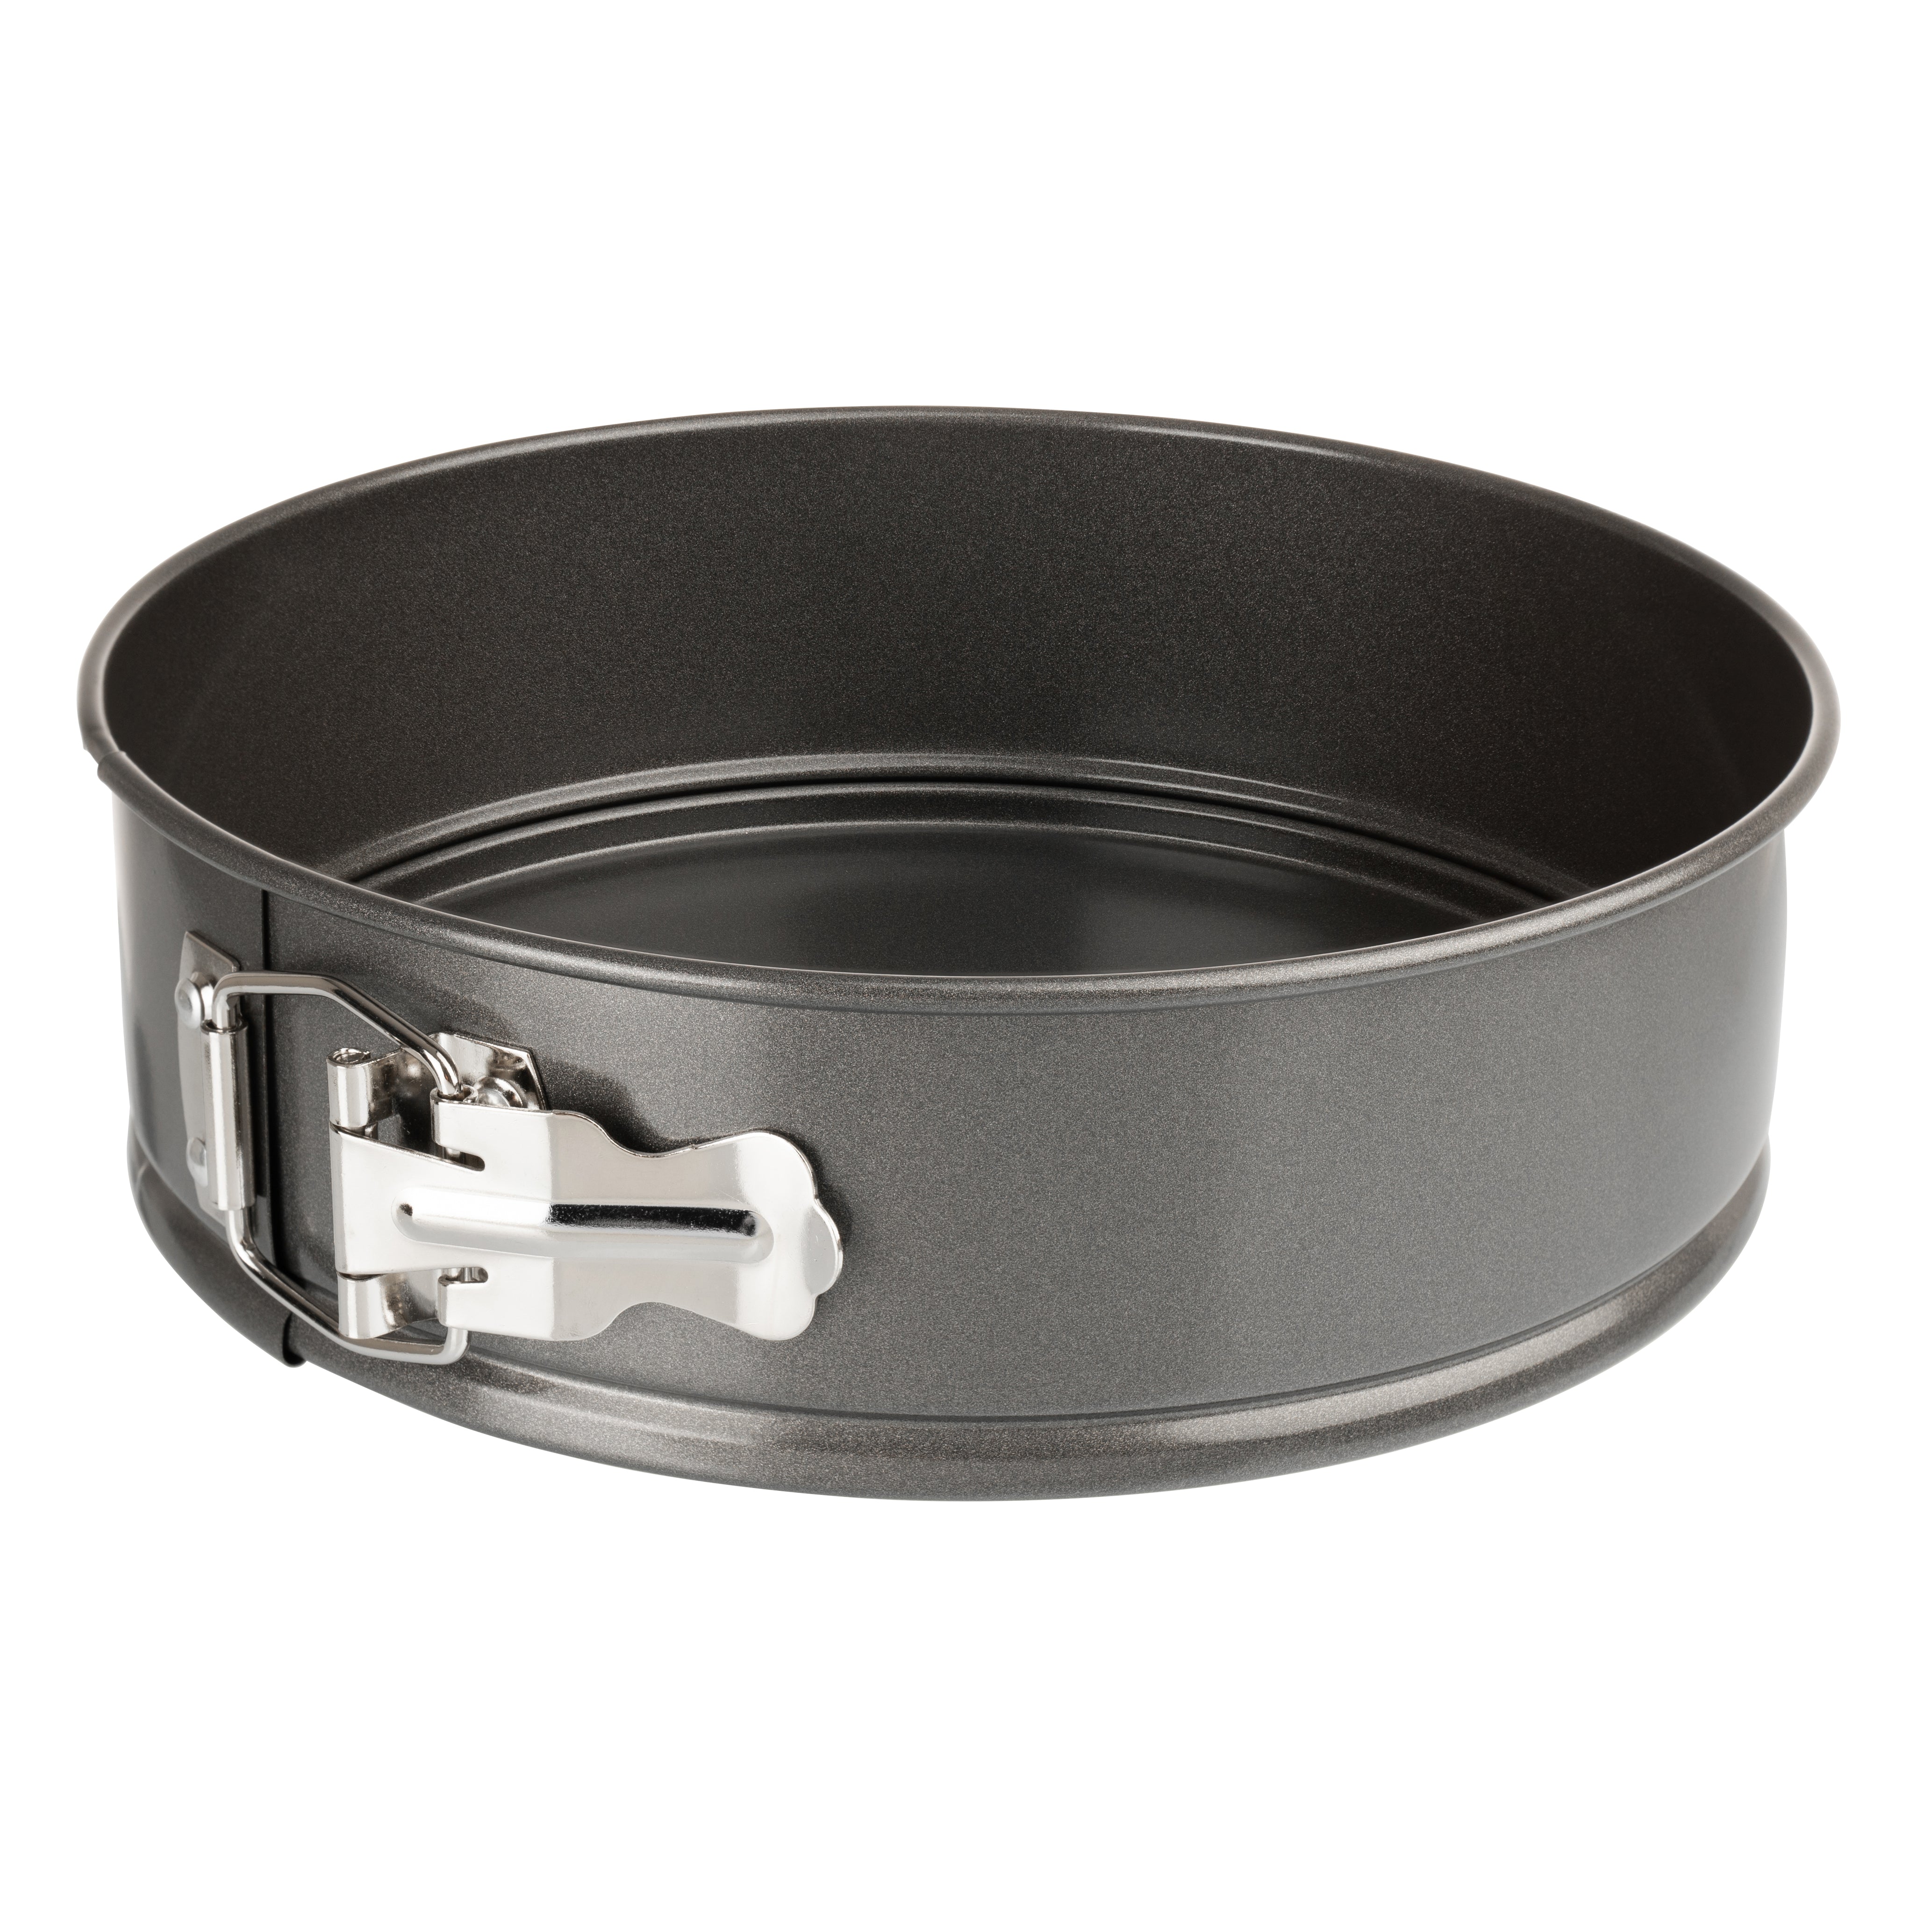 Luxe Kitchen Professional Quality 22.5cm / 9" Cake Baking Springform Pan Tin - The Cooks Cupboard Ltd